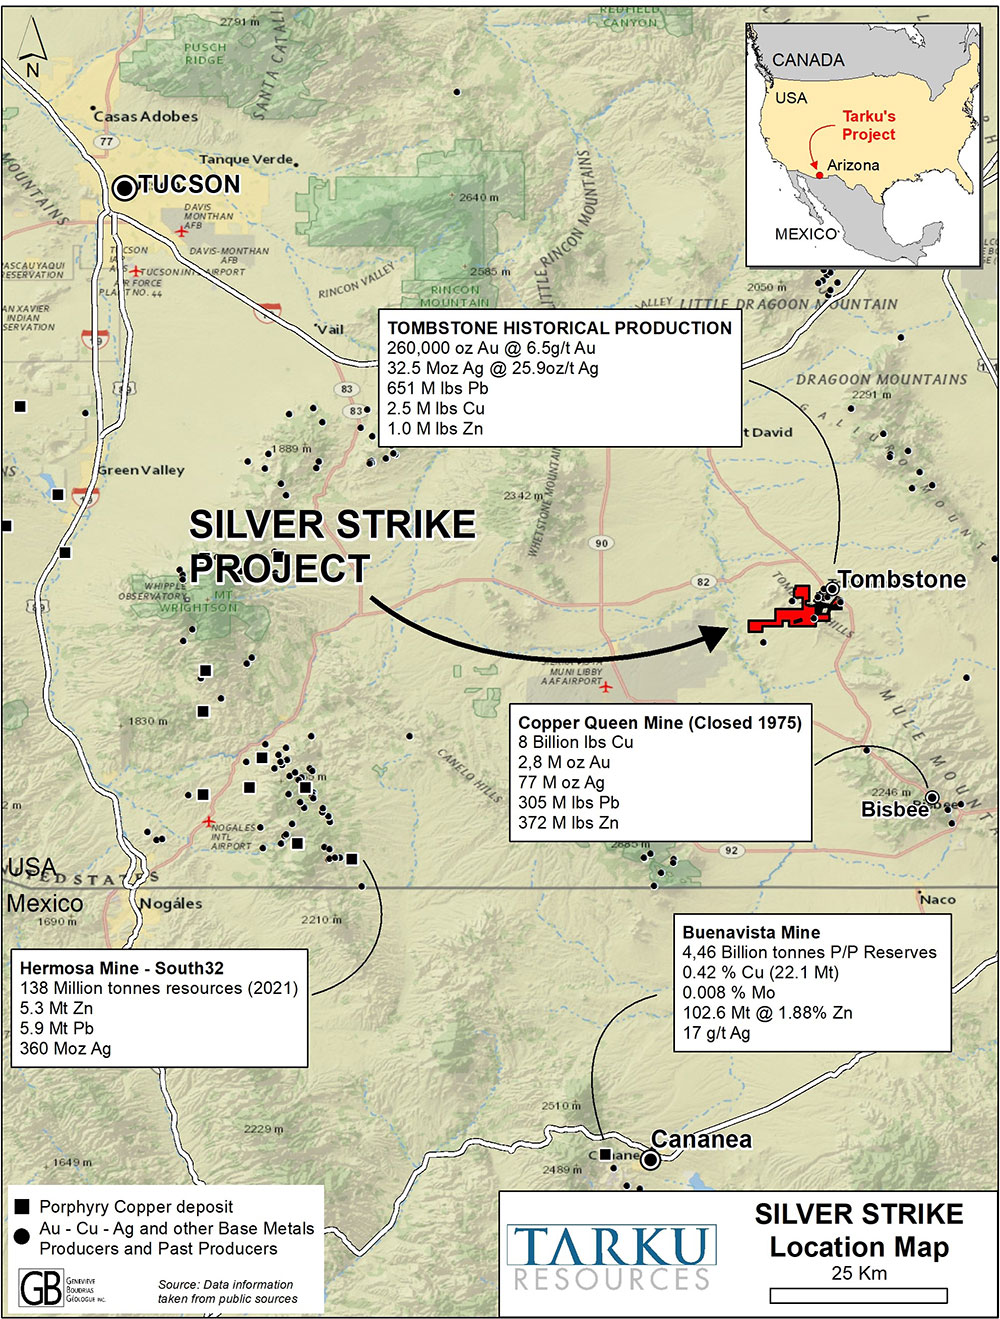 The Silver Strike Project and Other Regional Mines